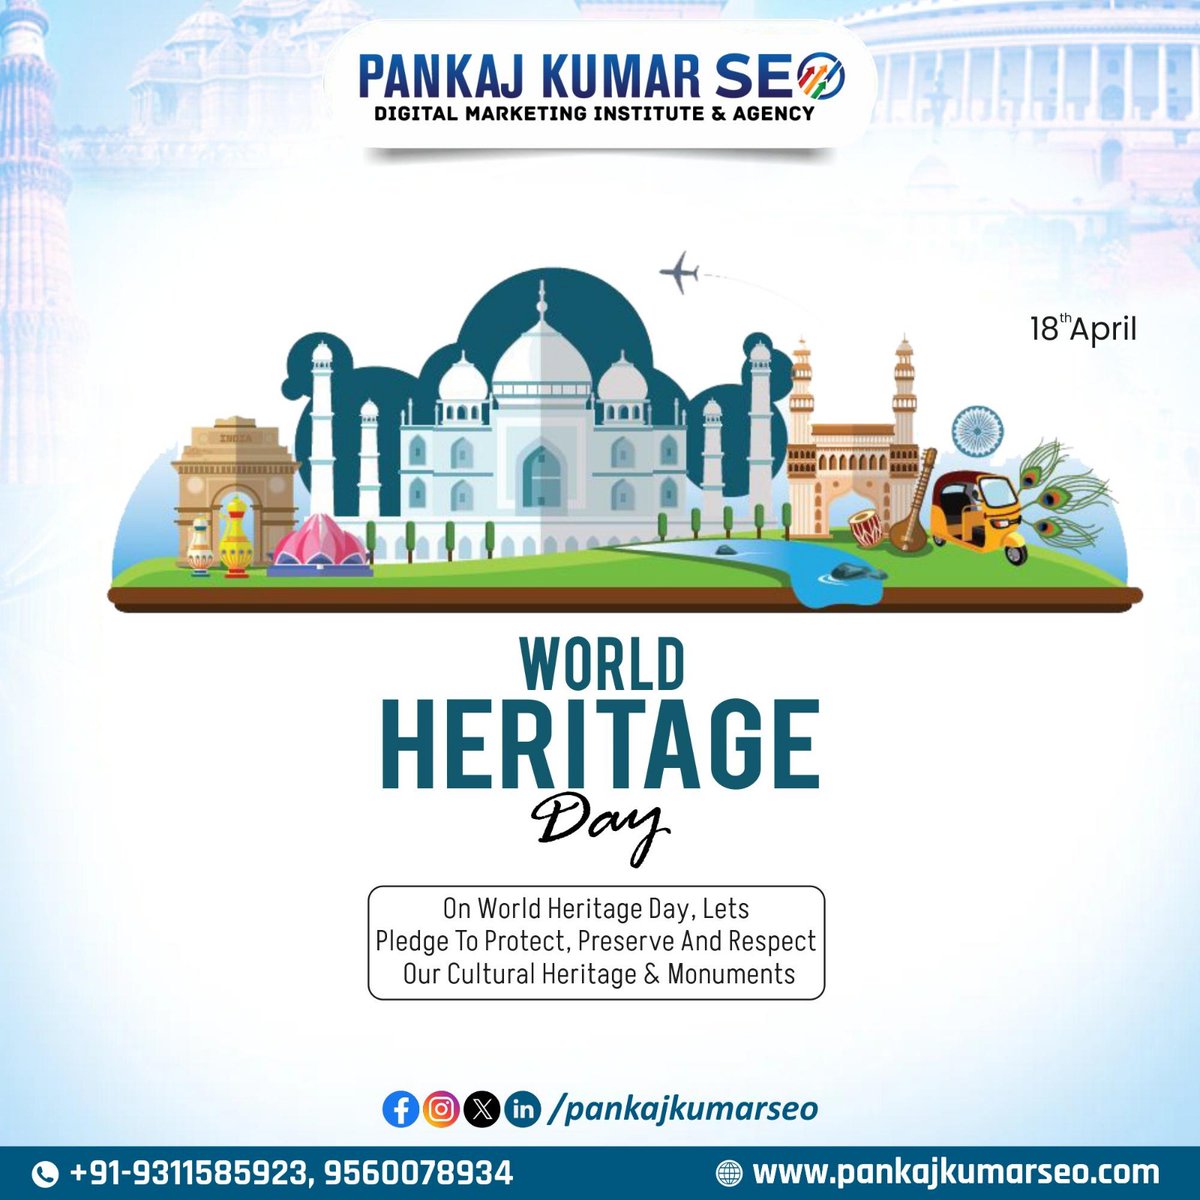 Happy world heritage day, may the world heritage be preserved...
.
.
.
#WorldHeritageDay #culturalheritage #Monuments #worldwideshipping #celebrateculture #historicalsites  #travelling #wanderlust #discoverhistory #AncientWonders #CulturalExploration #archaeology #globalheritage